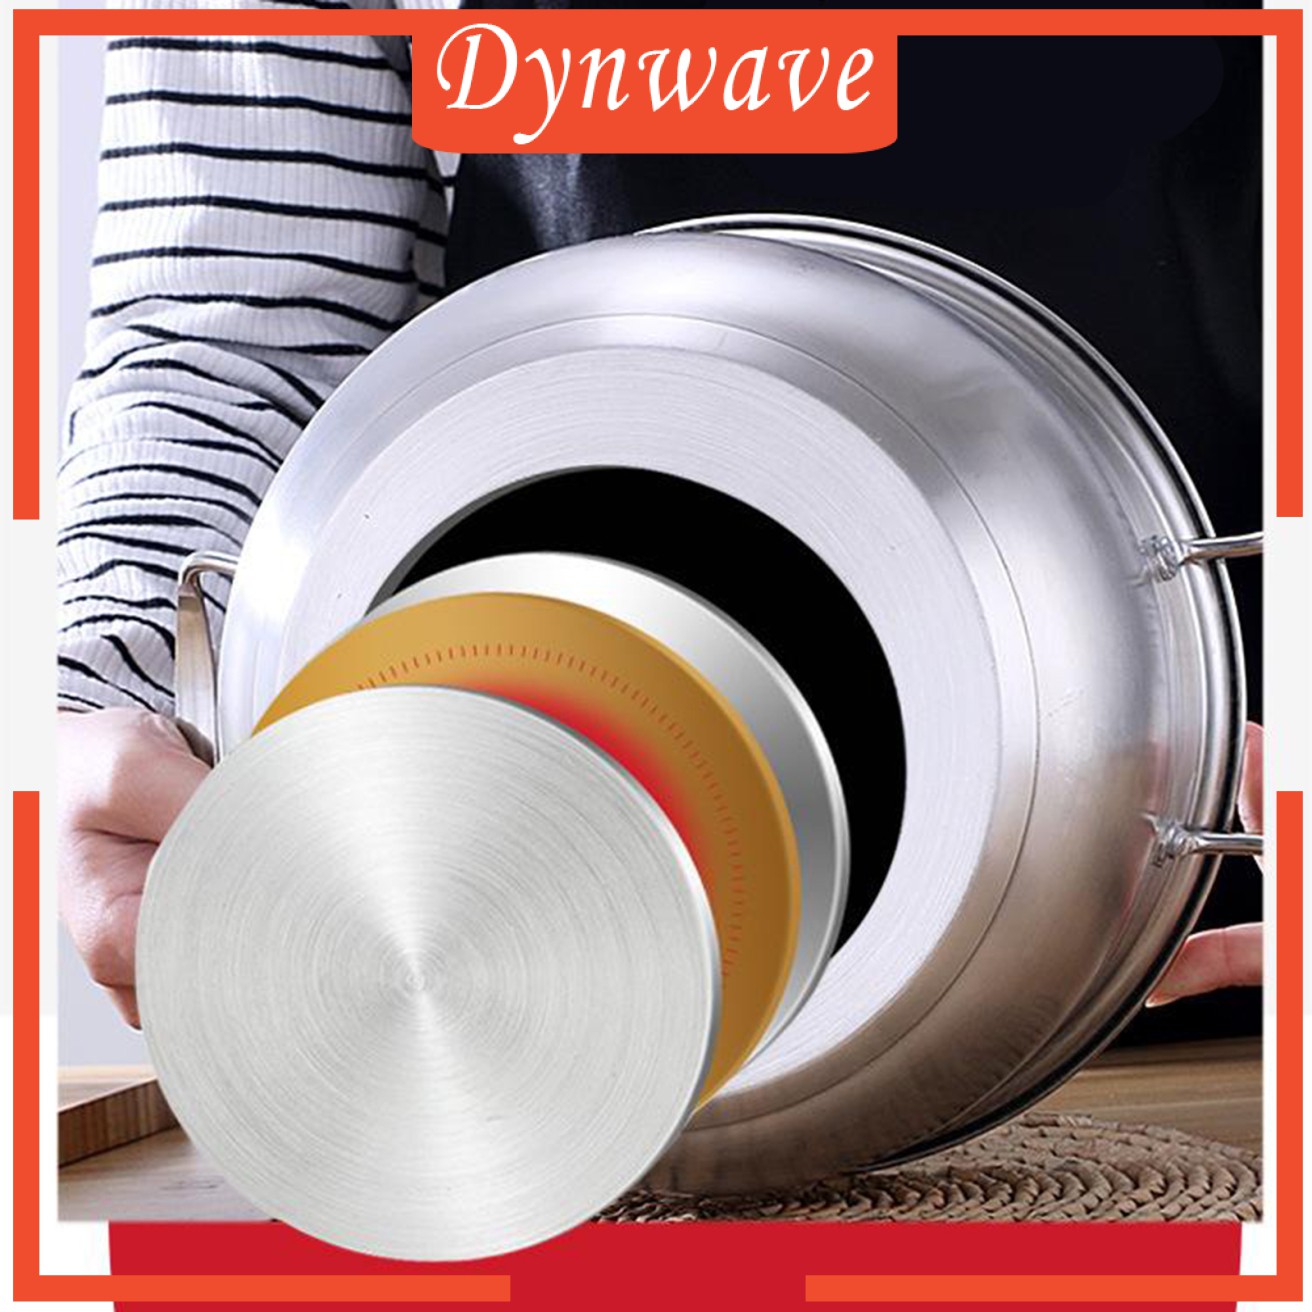 [DYNWAVE] Stainless Steel Soup Pan Saucepan Stockpot Non Stick Camping Picnic Cookware